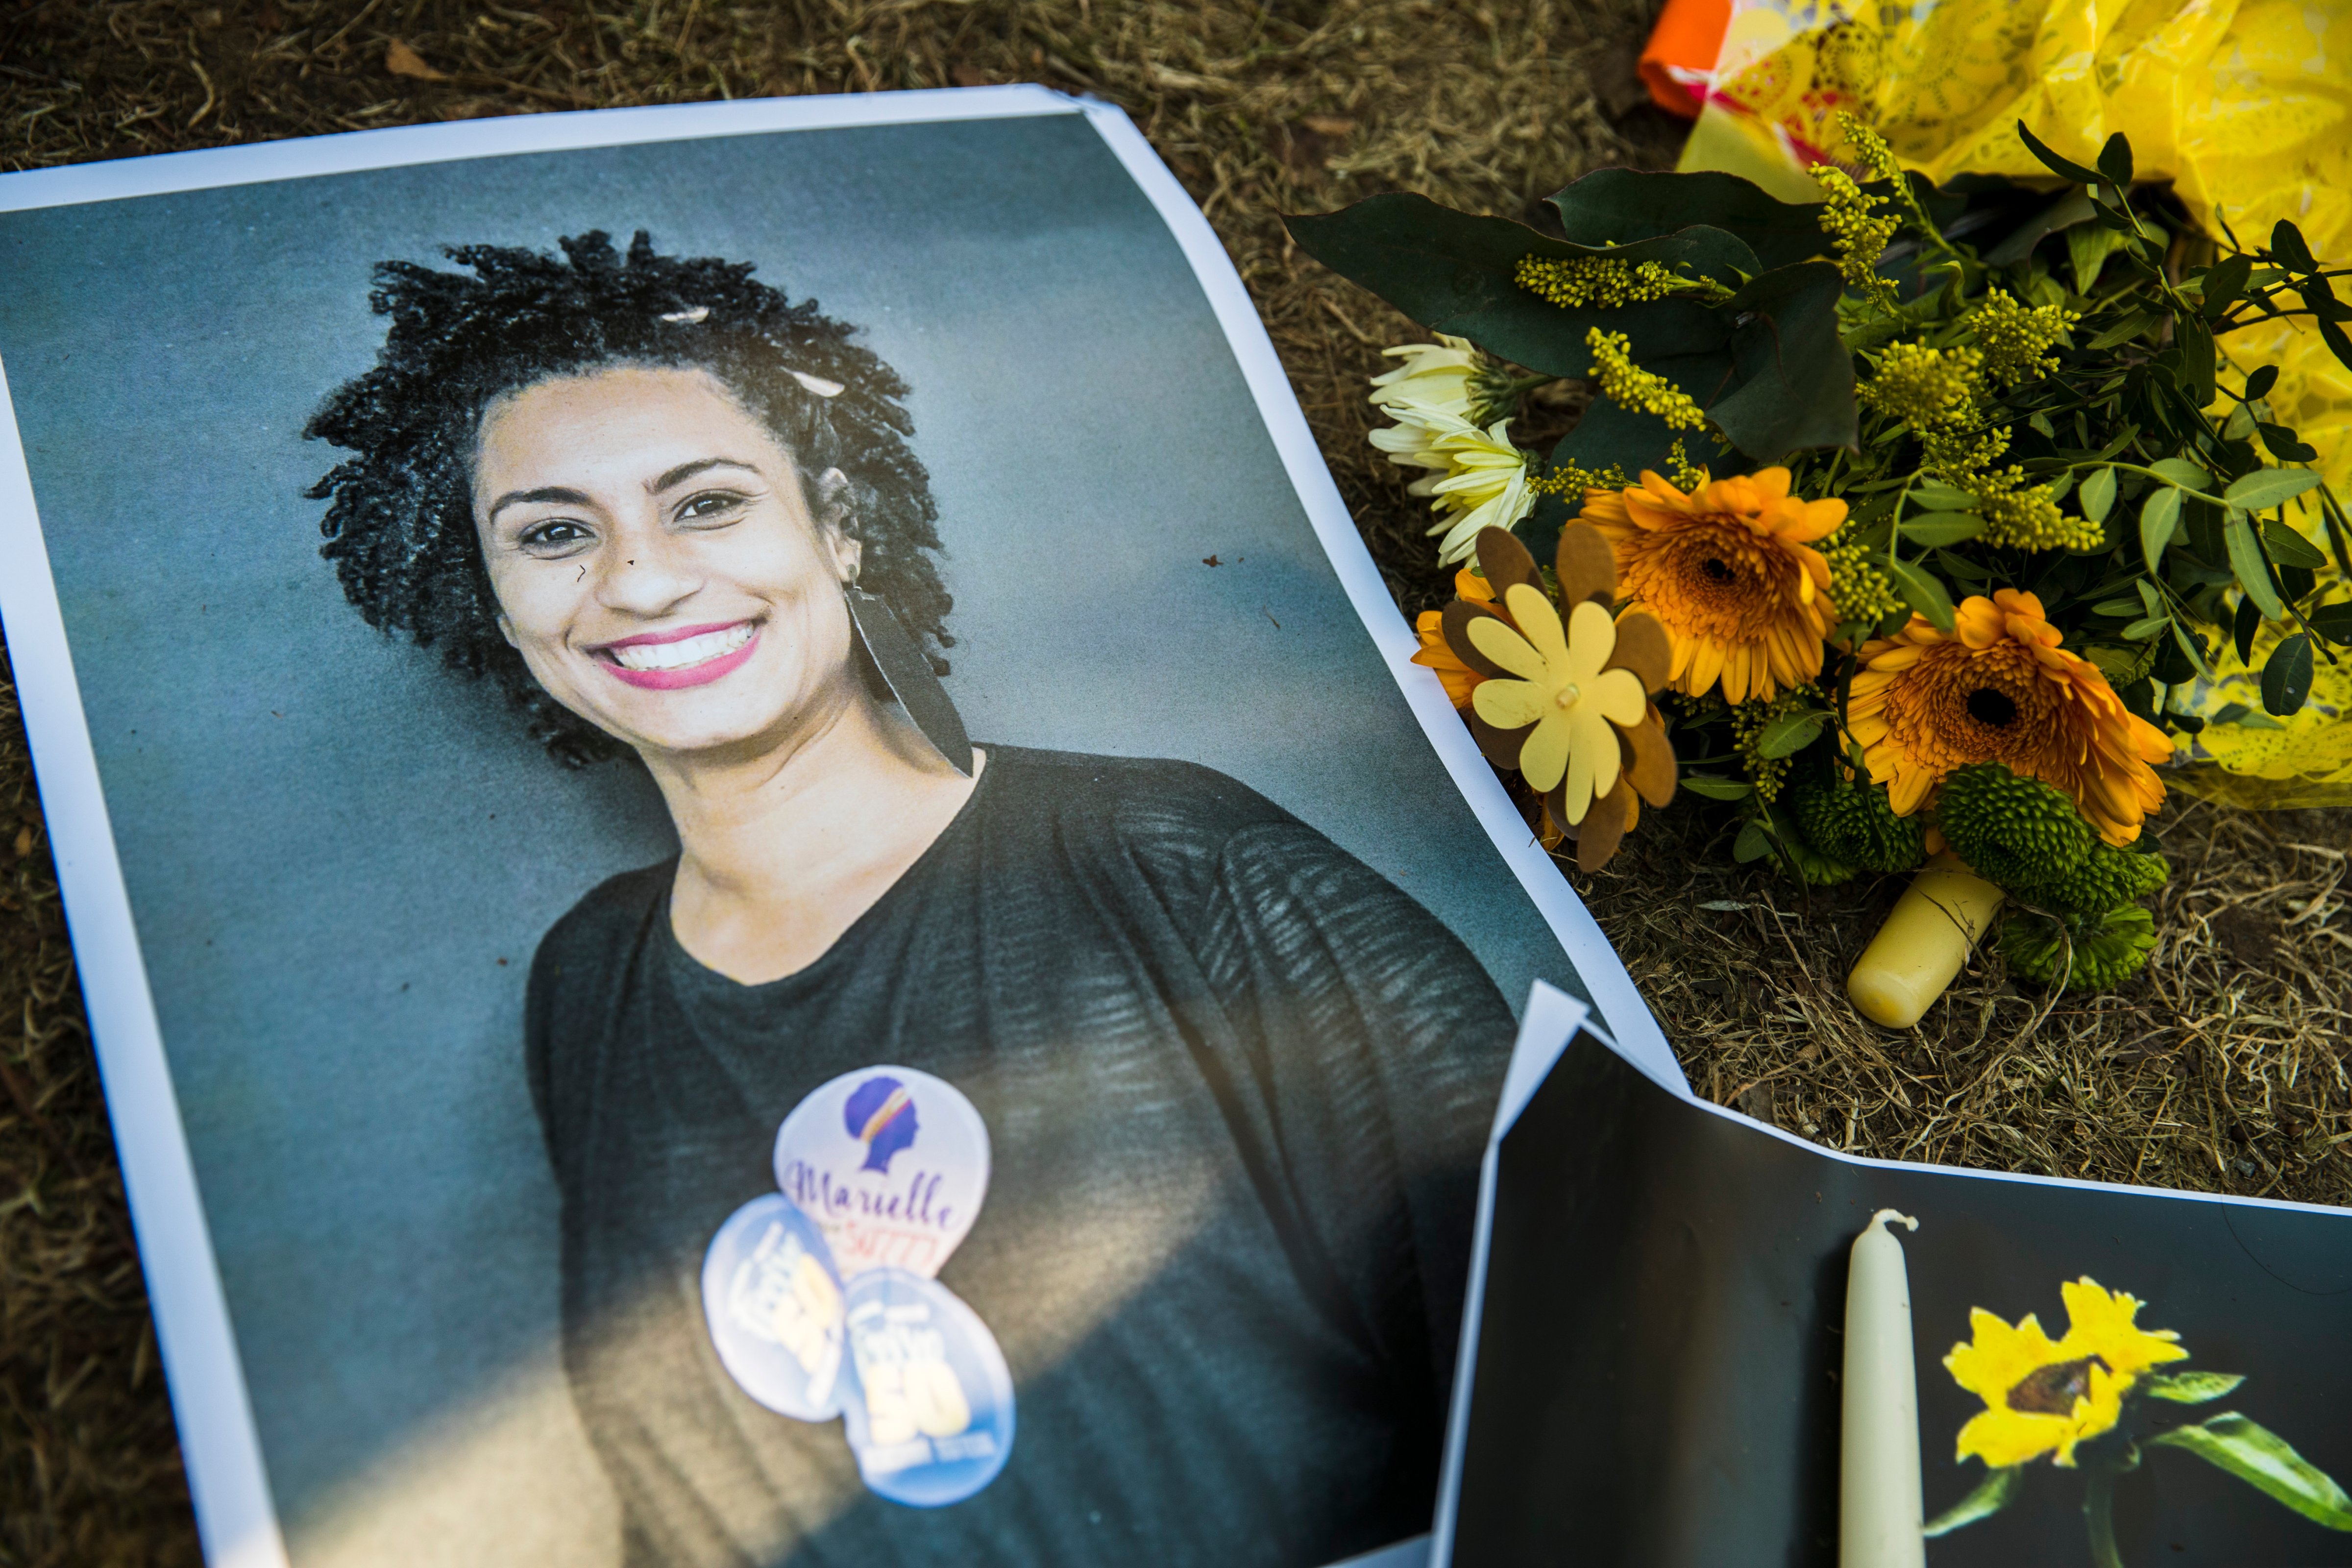 A makeshift memorial is pictured during a protest of Brazilian expats against the killing of Rio de Janeiro's left councilwoman and activist Marielle Franco in Berlin, Germany on March 18, 2018. (NurPhoto/ Getty Images)